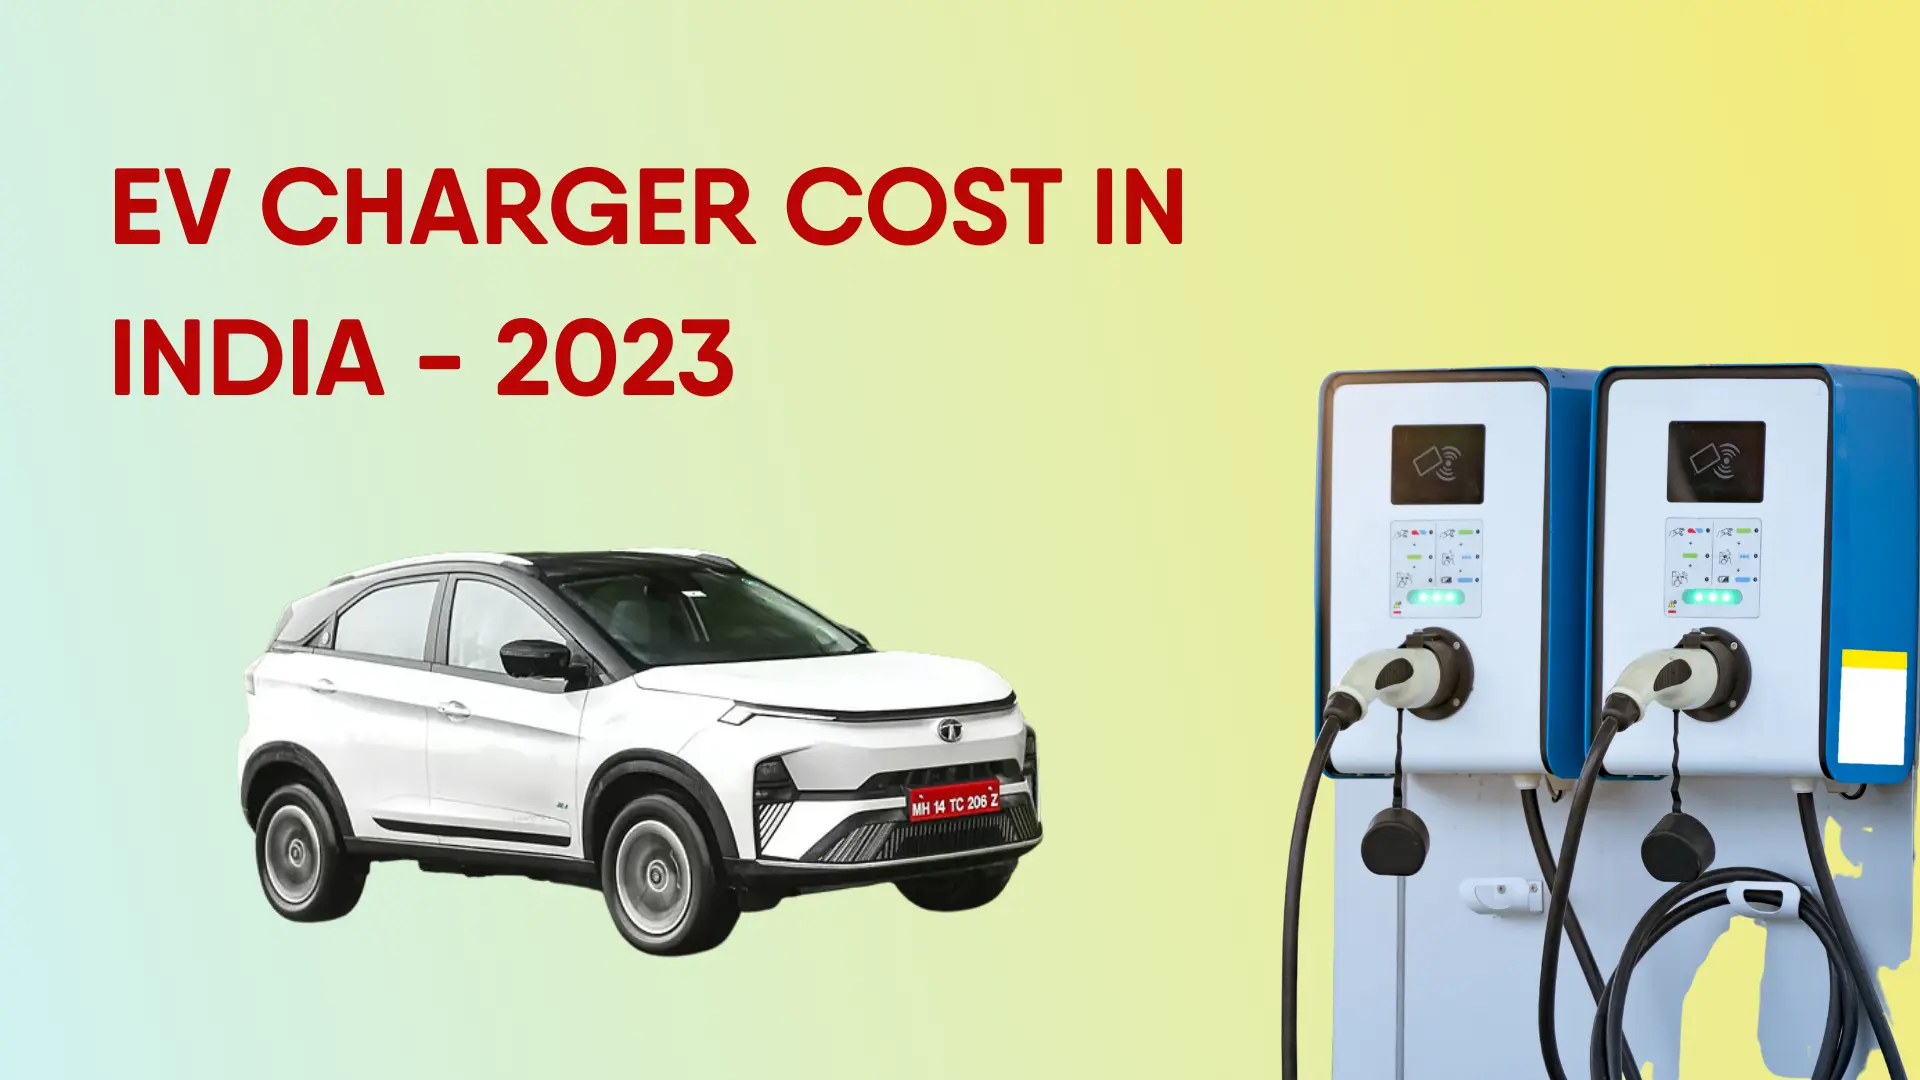 EV charger cost in India